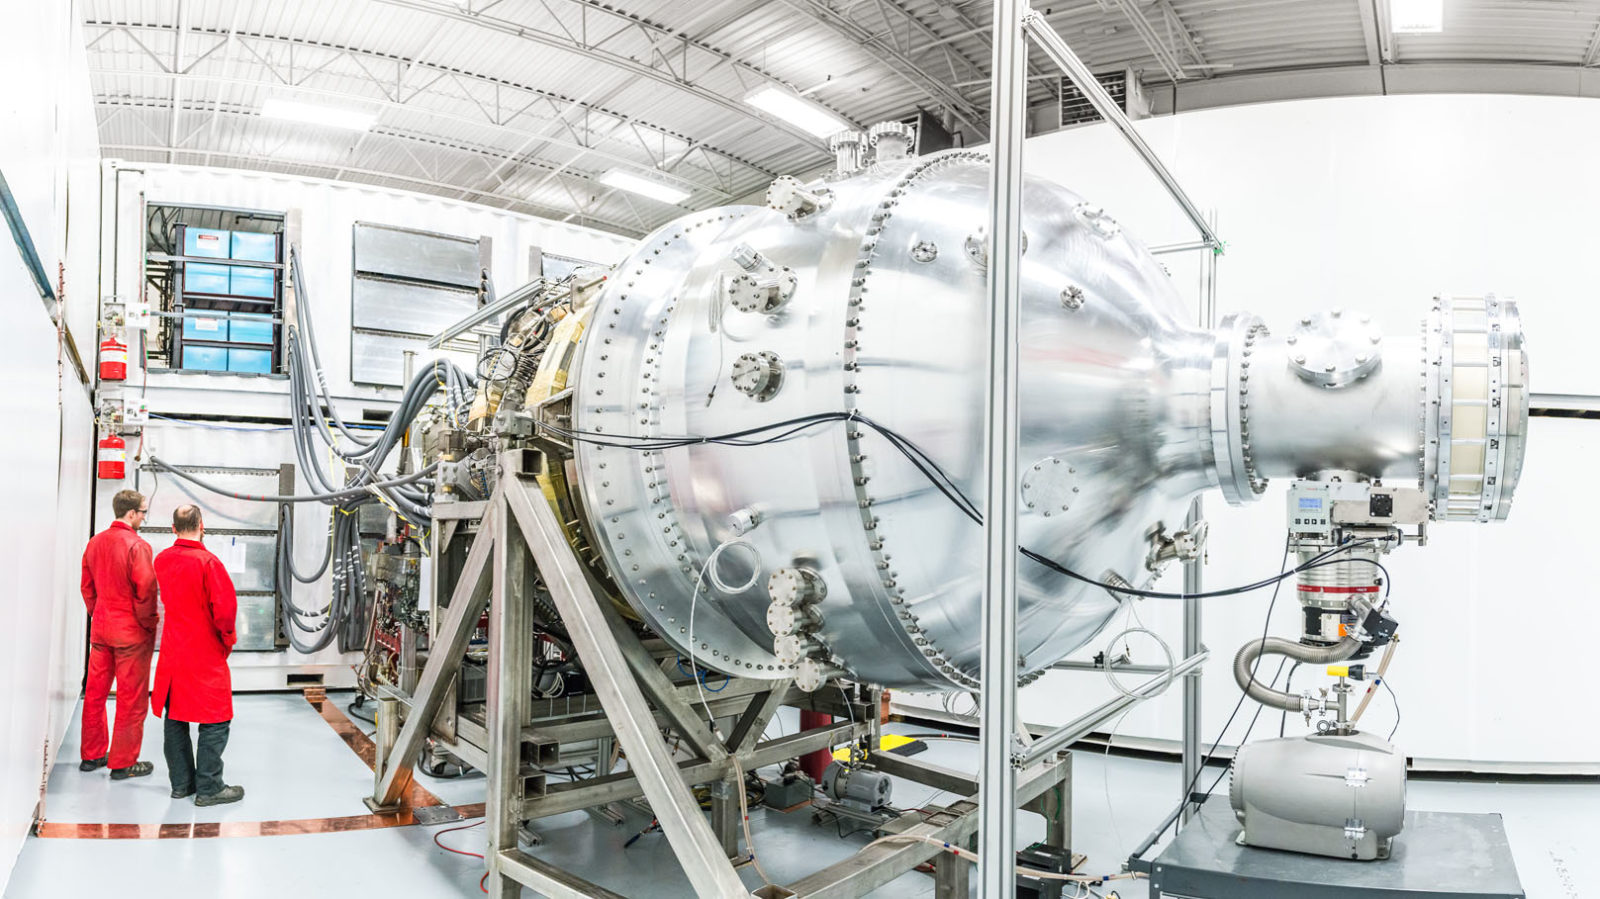 Achieving an 80x increase in plasma lifespan (and what it means for fusion energy)